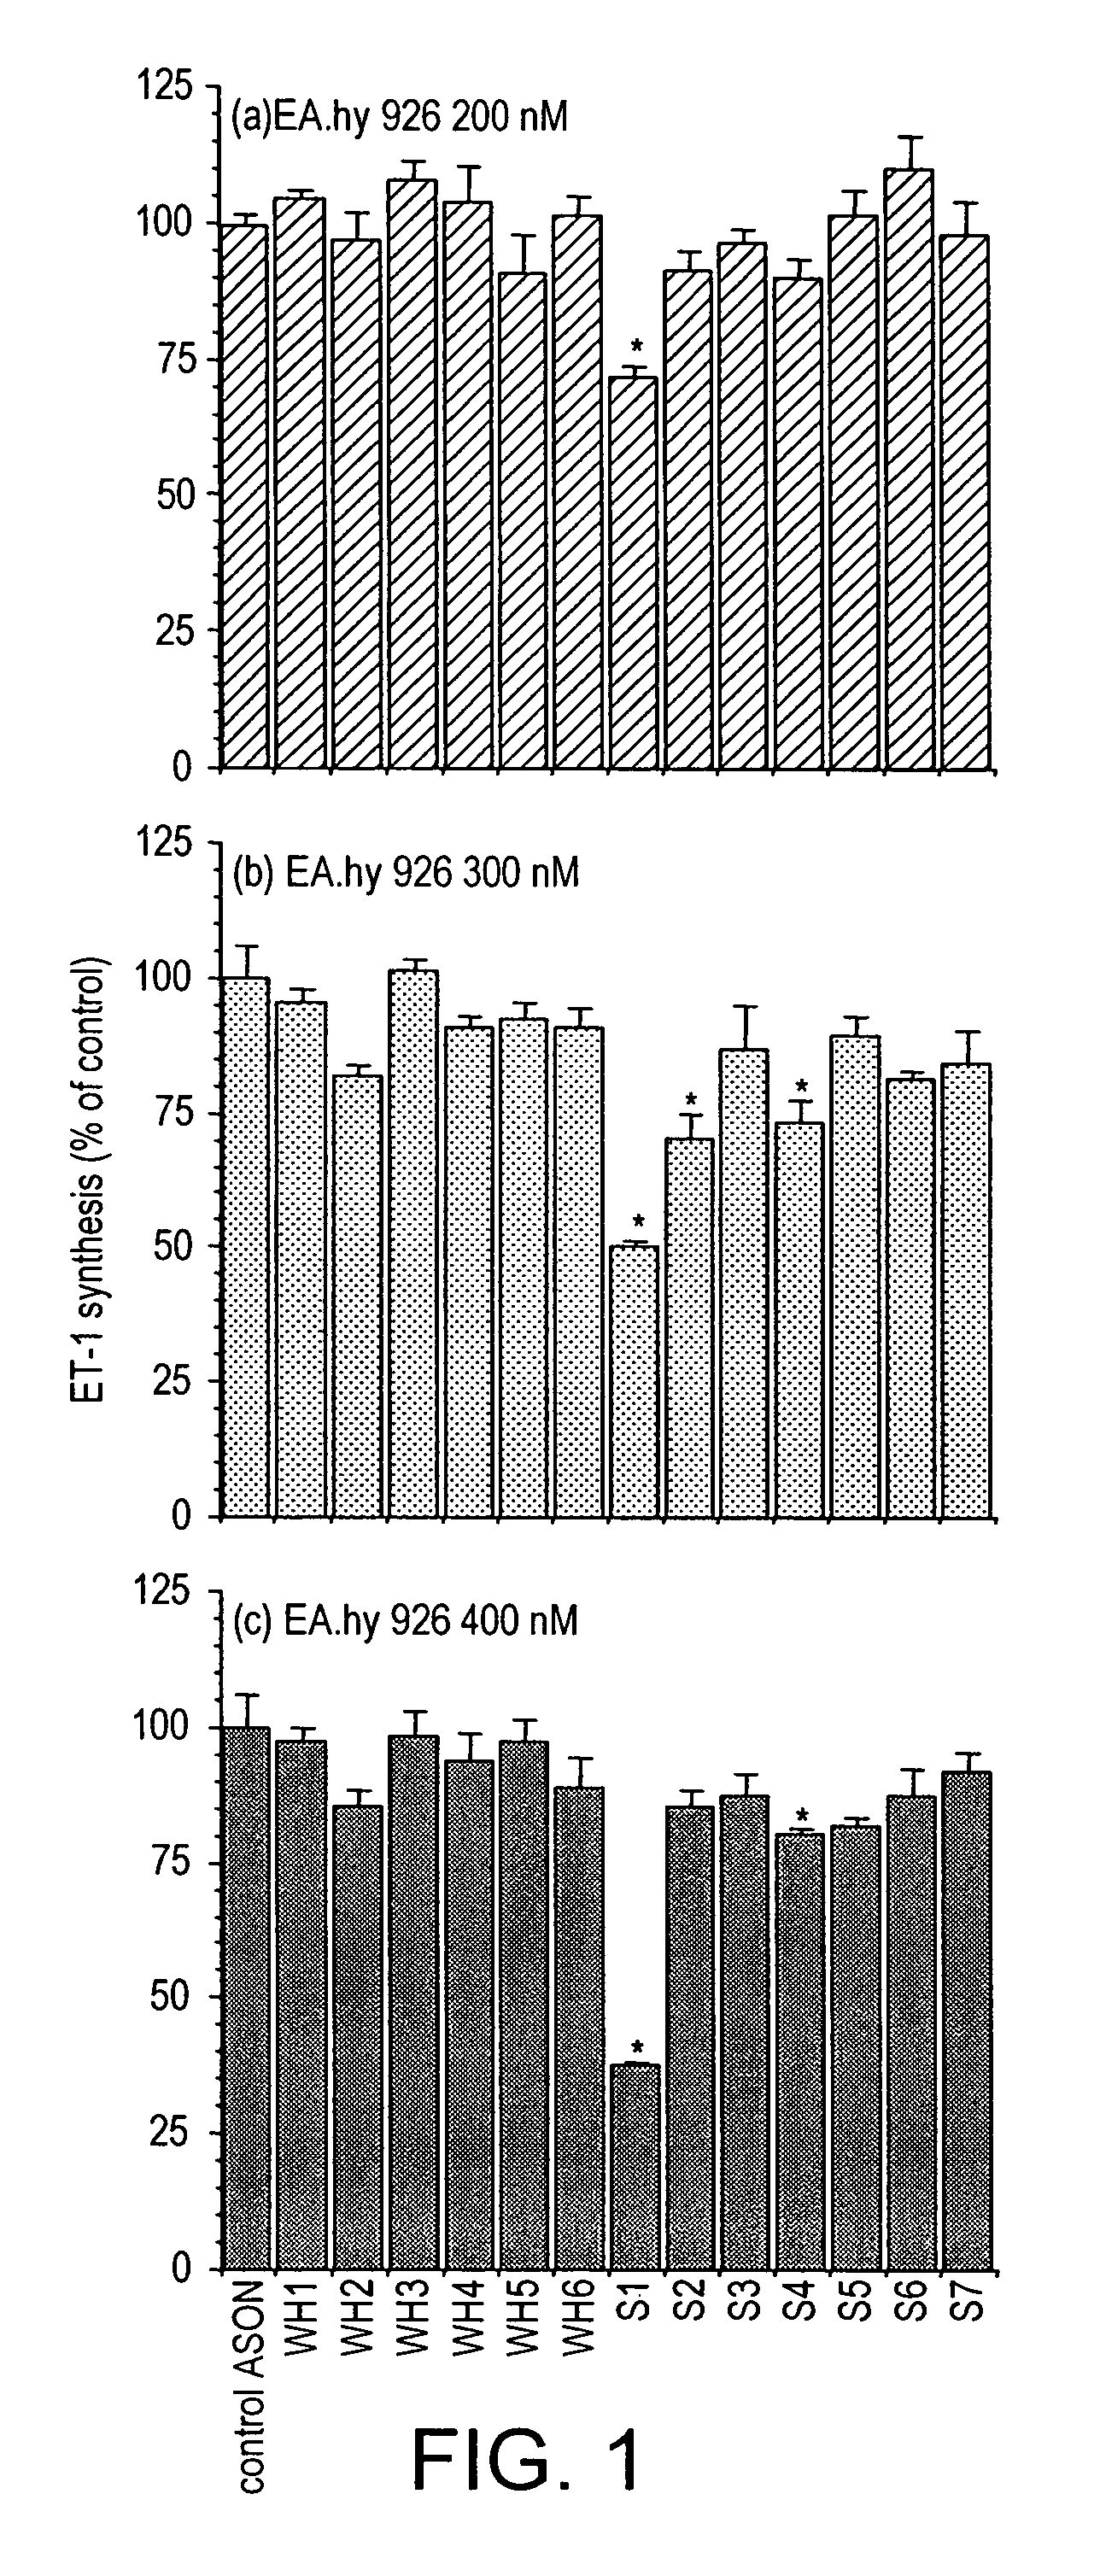 Inhibitors of endothelin-1 synthesis